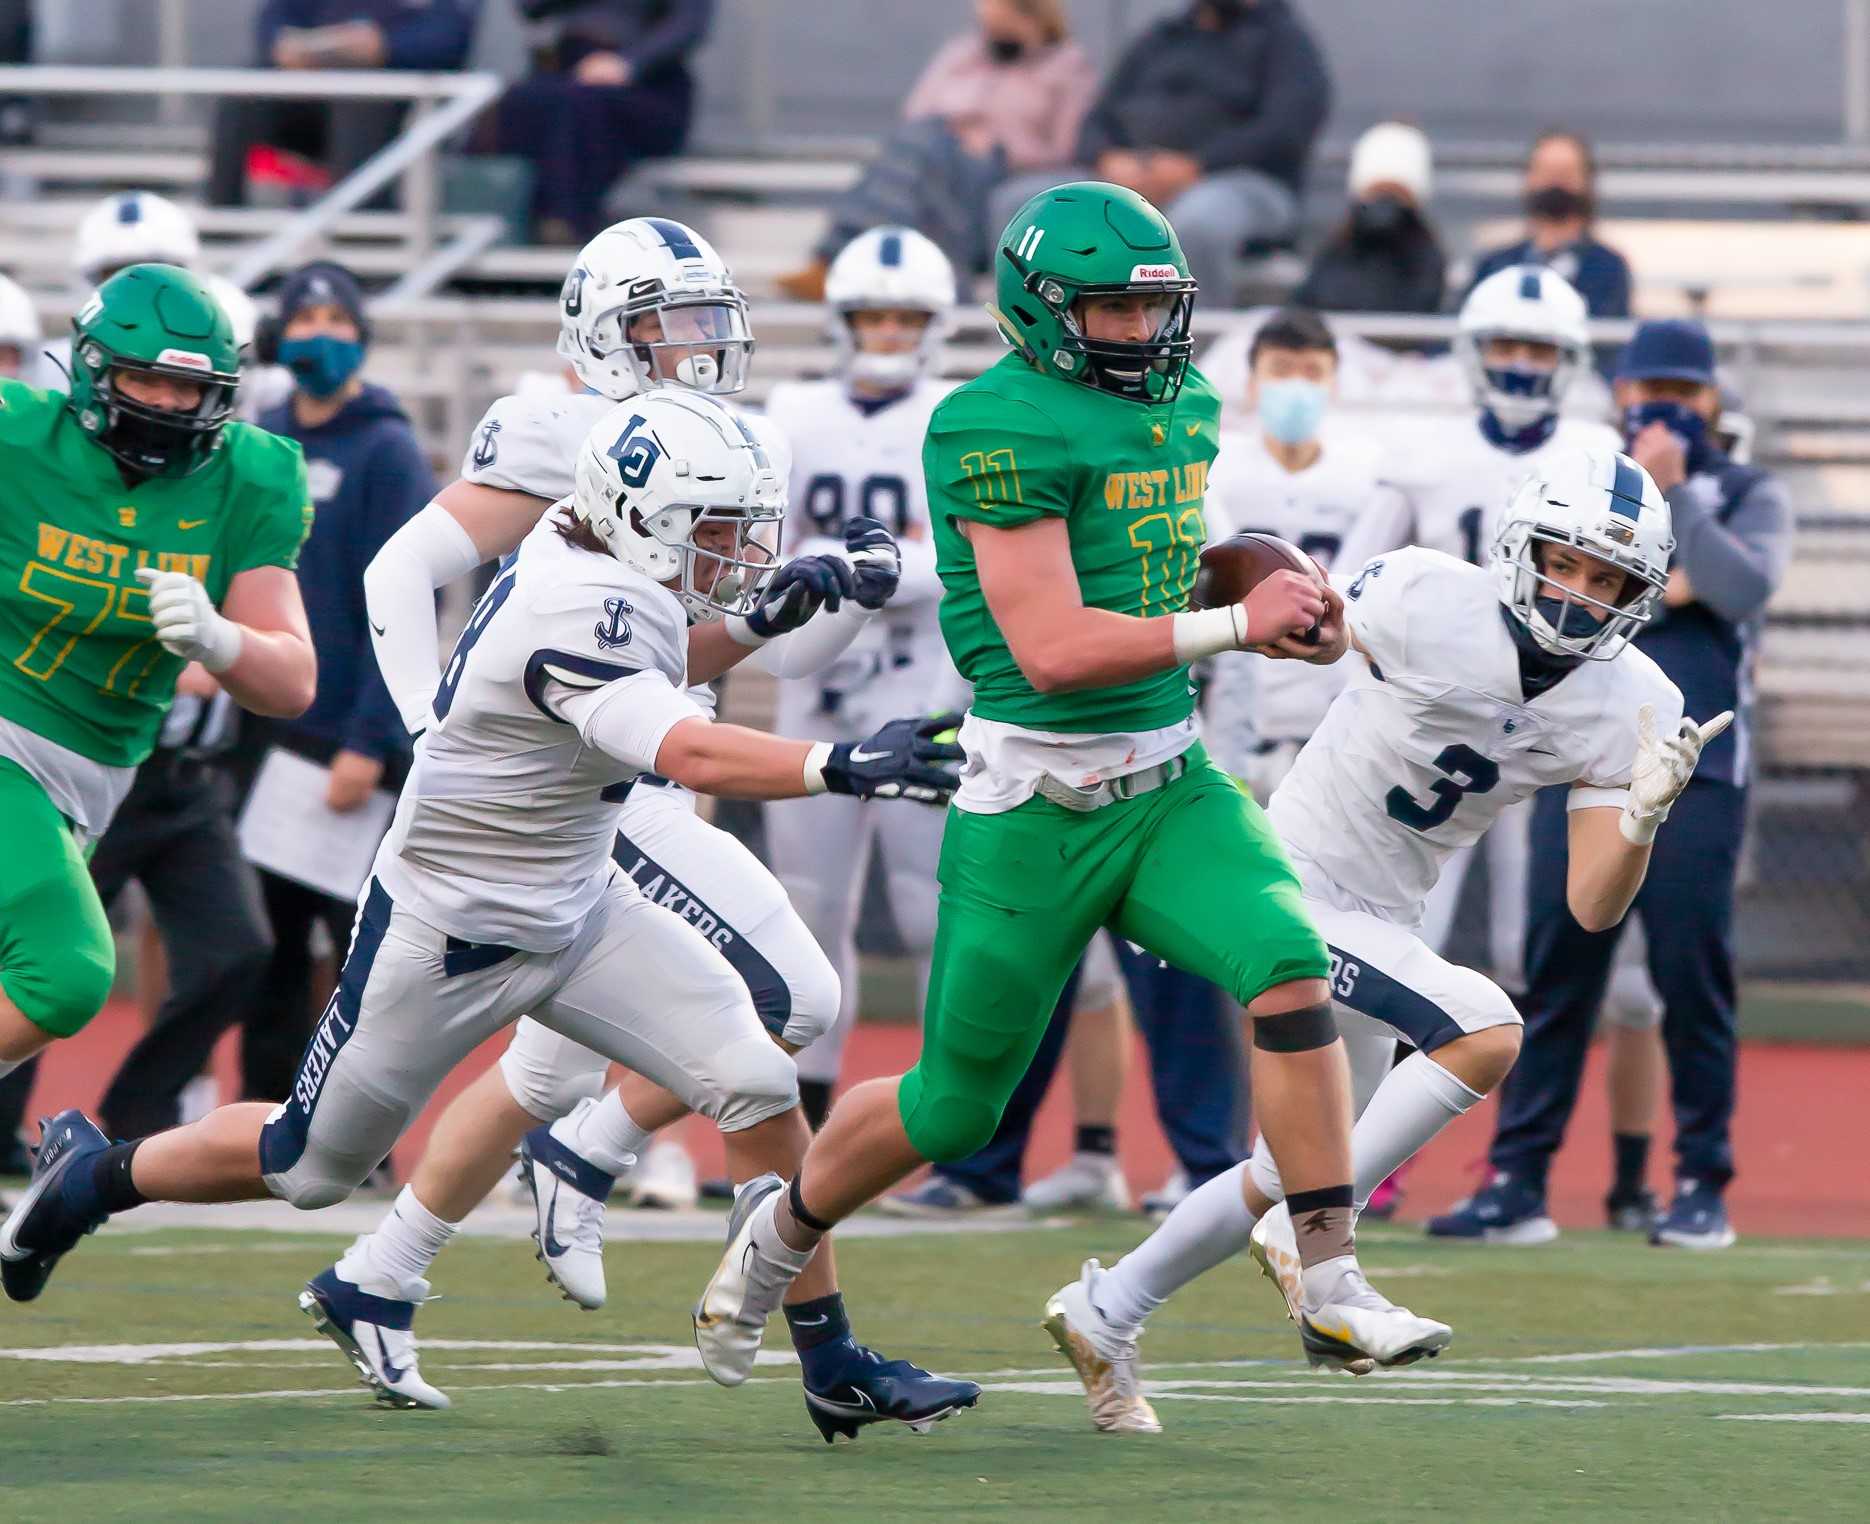 West Linn's Kaanan Huffman outruns Lake Oswego defenders on a 29-yard touchdown catch. (Photo by Brad Cantor)